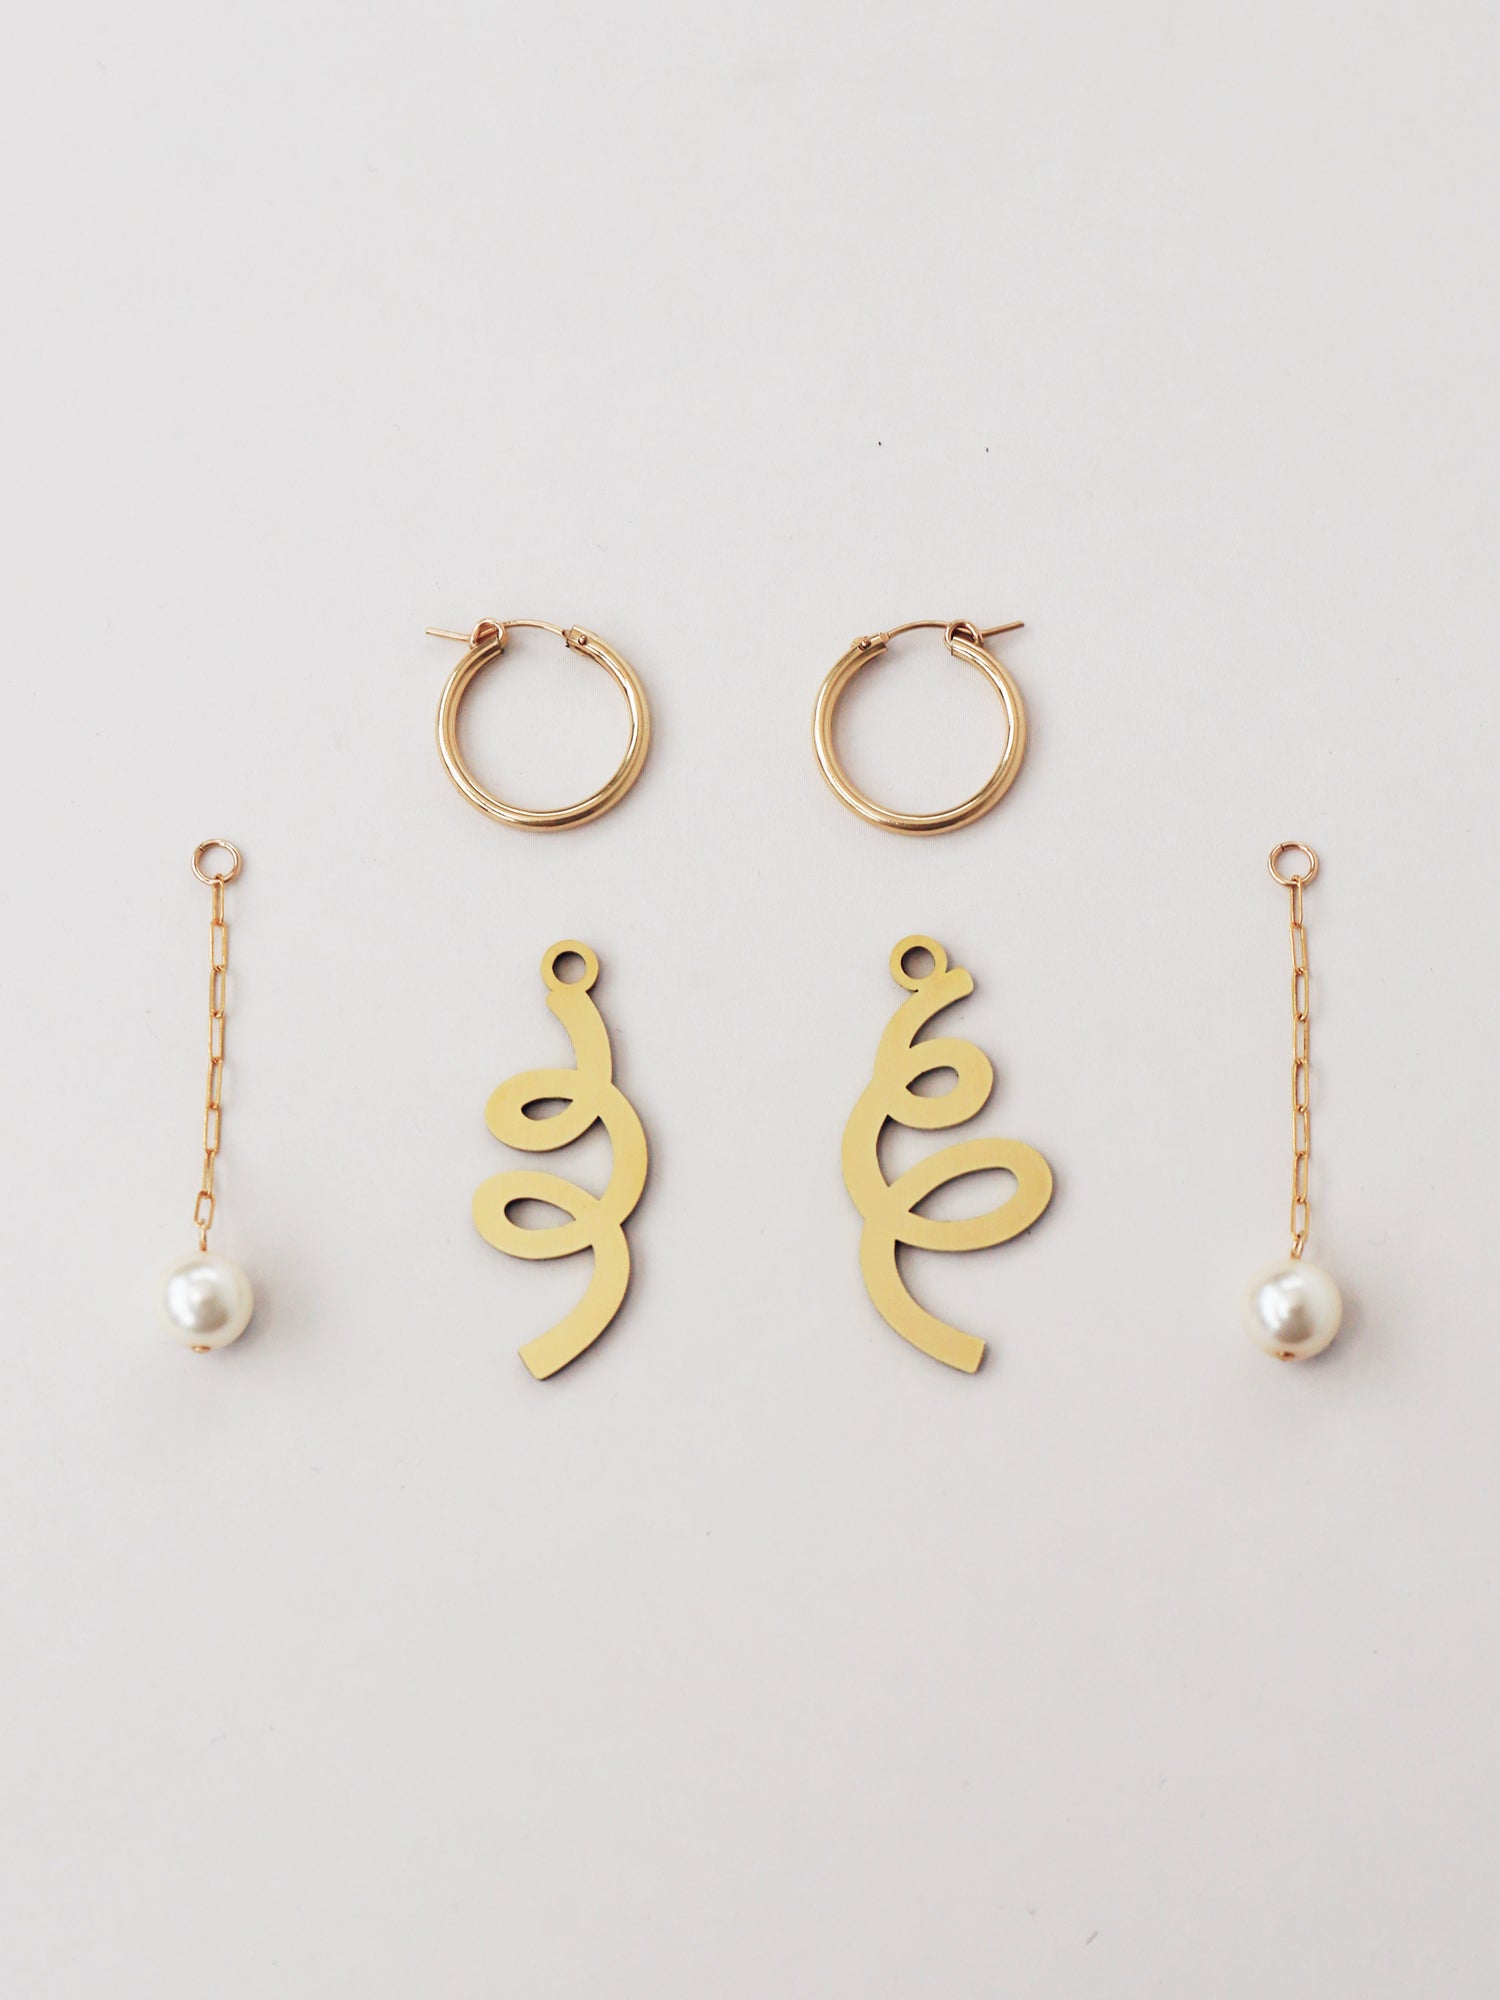 Lola Charm Hoops in Brass. Mix 'n' match curly brass charms and Czech glass baroque pearls on a paperclip gold-filled chain with sterling silver earring posts. Made in the UK by Wolf & Moon.